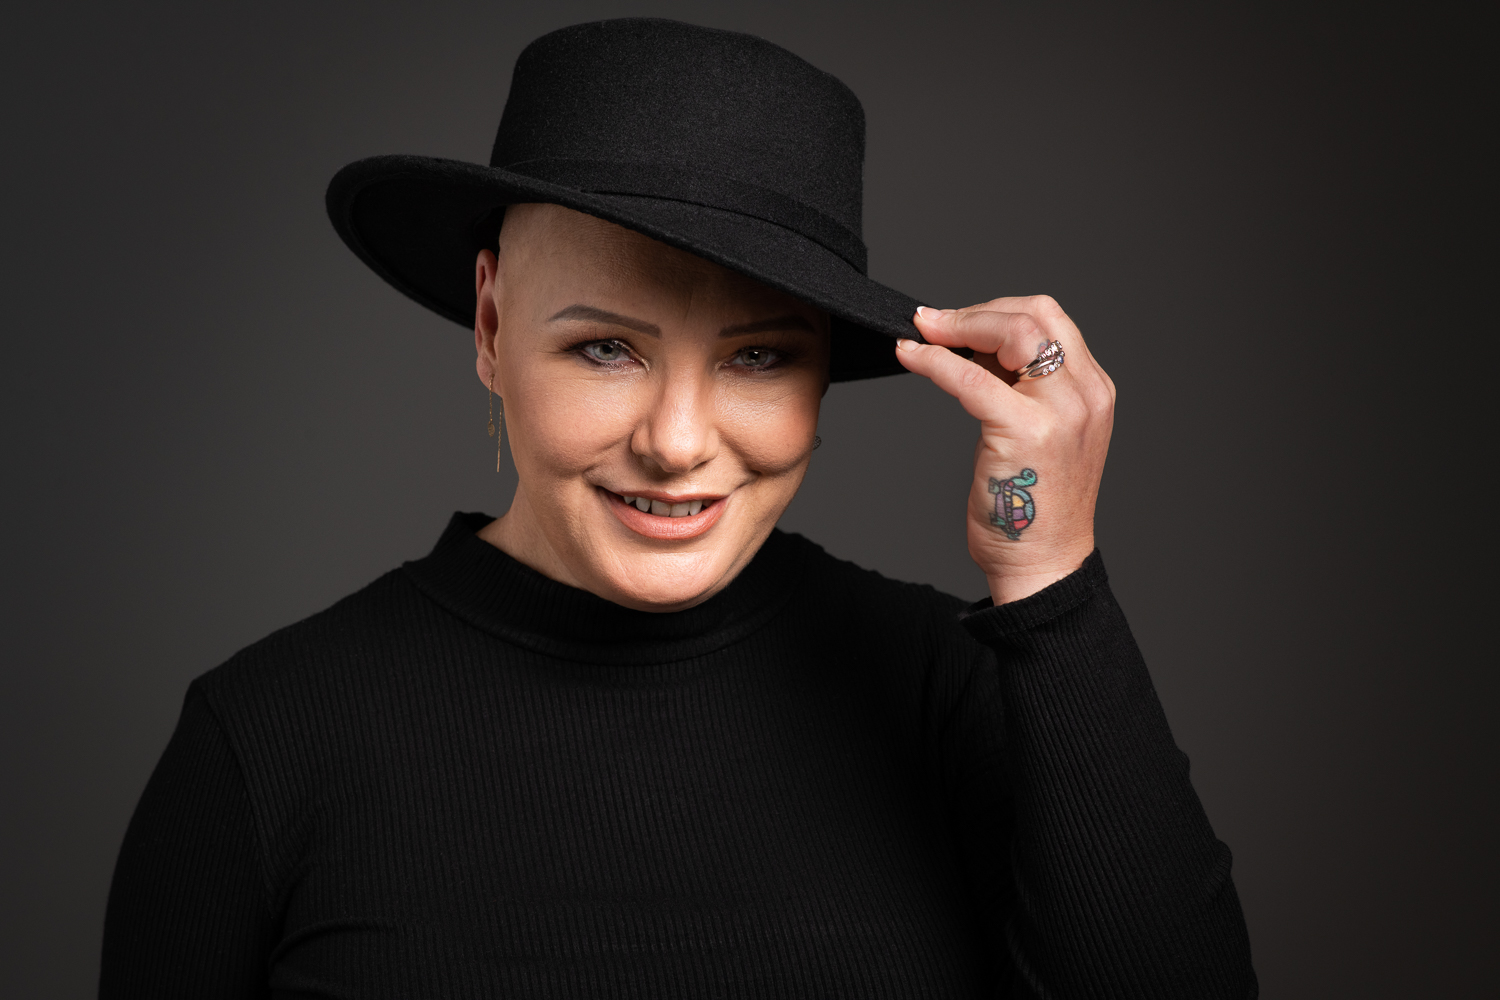 Professional portrait of woman wearing all black, smiling to camera. She has a black hat and is holding it with one hand. On her hand you can see a colourful tattoo or a turtle.